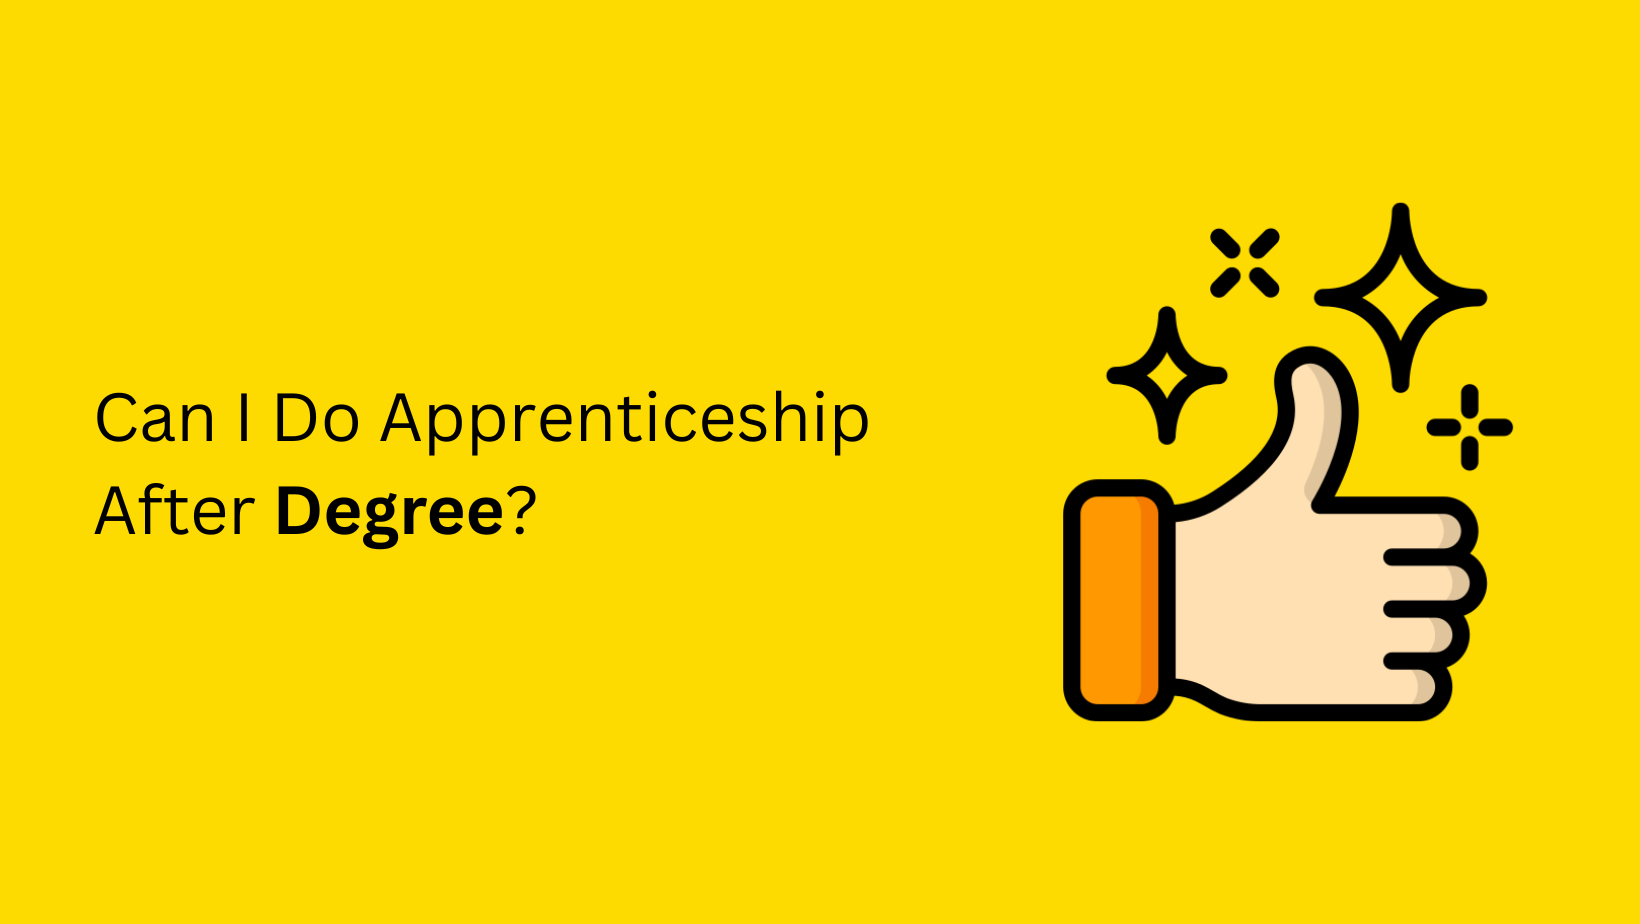 Can I Do Apprenticeship After Degree